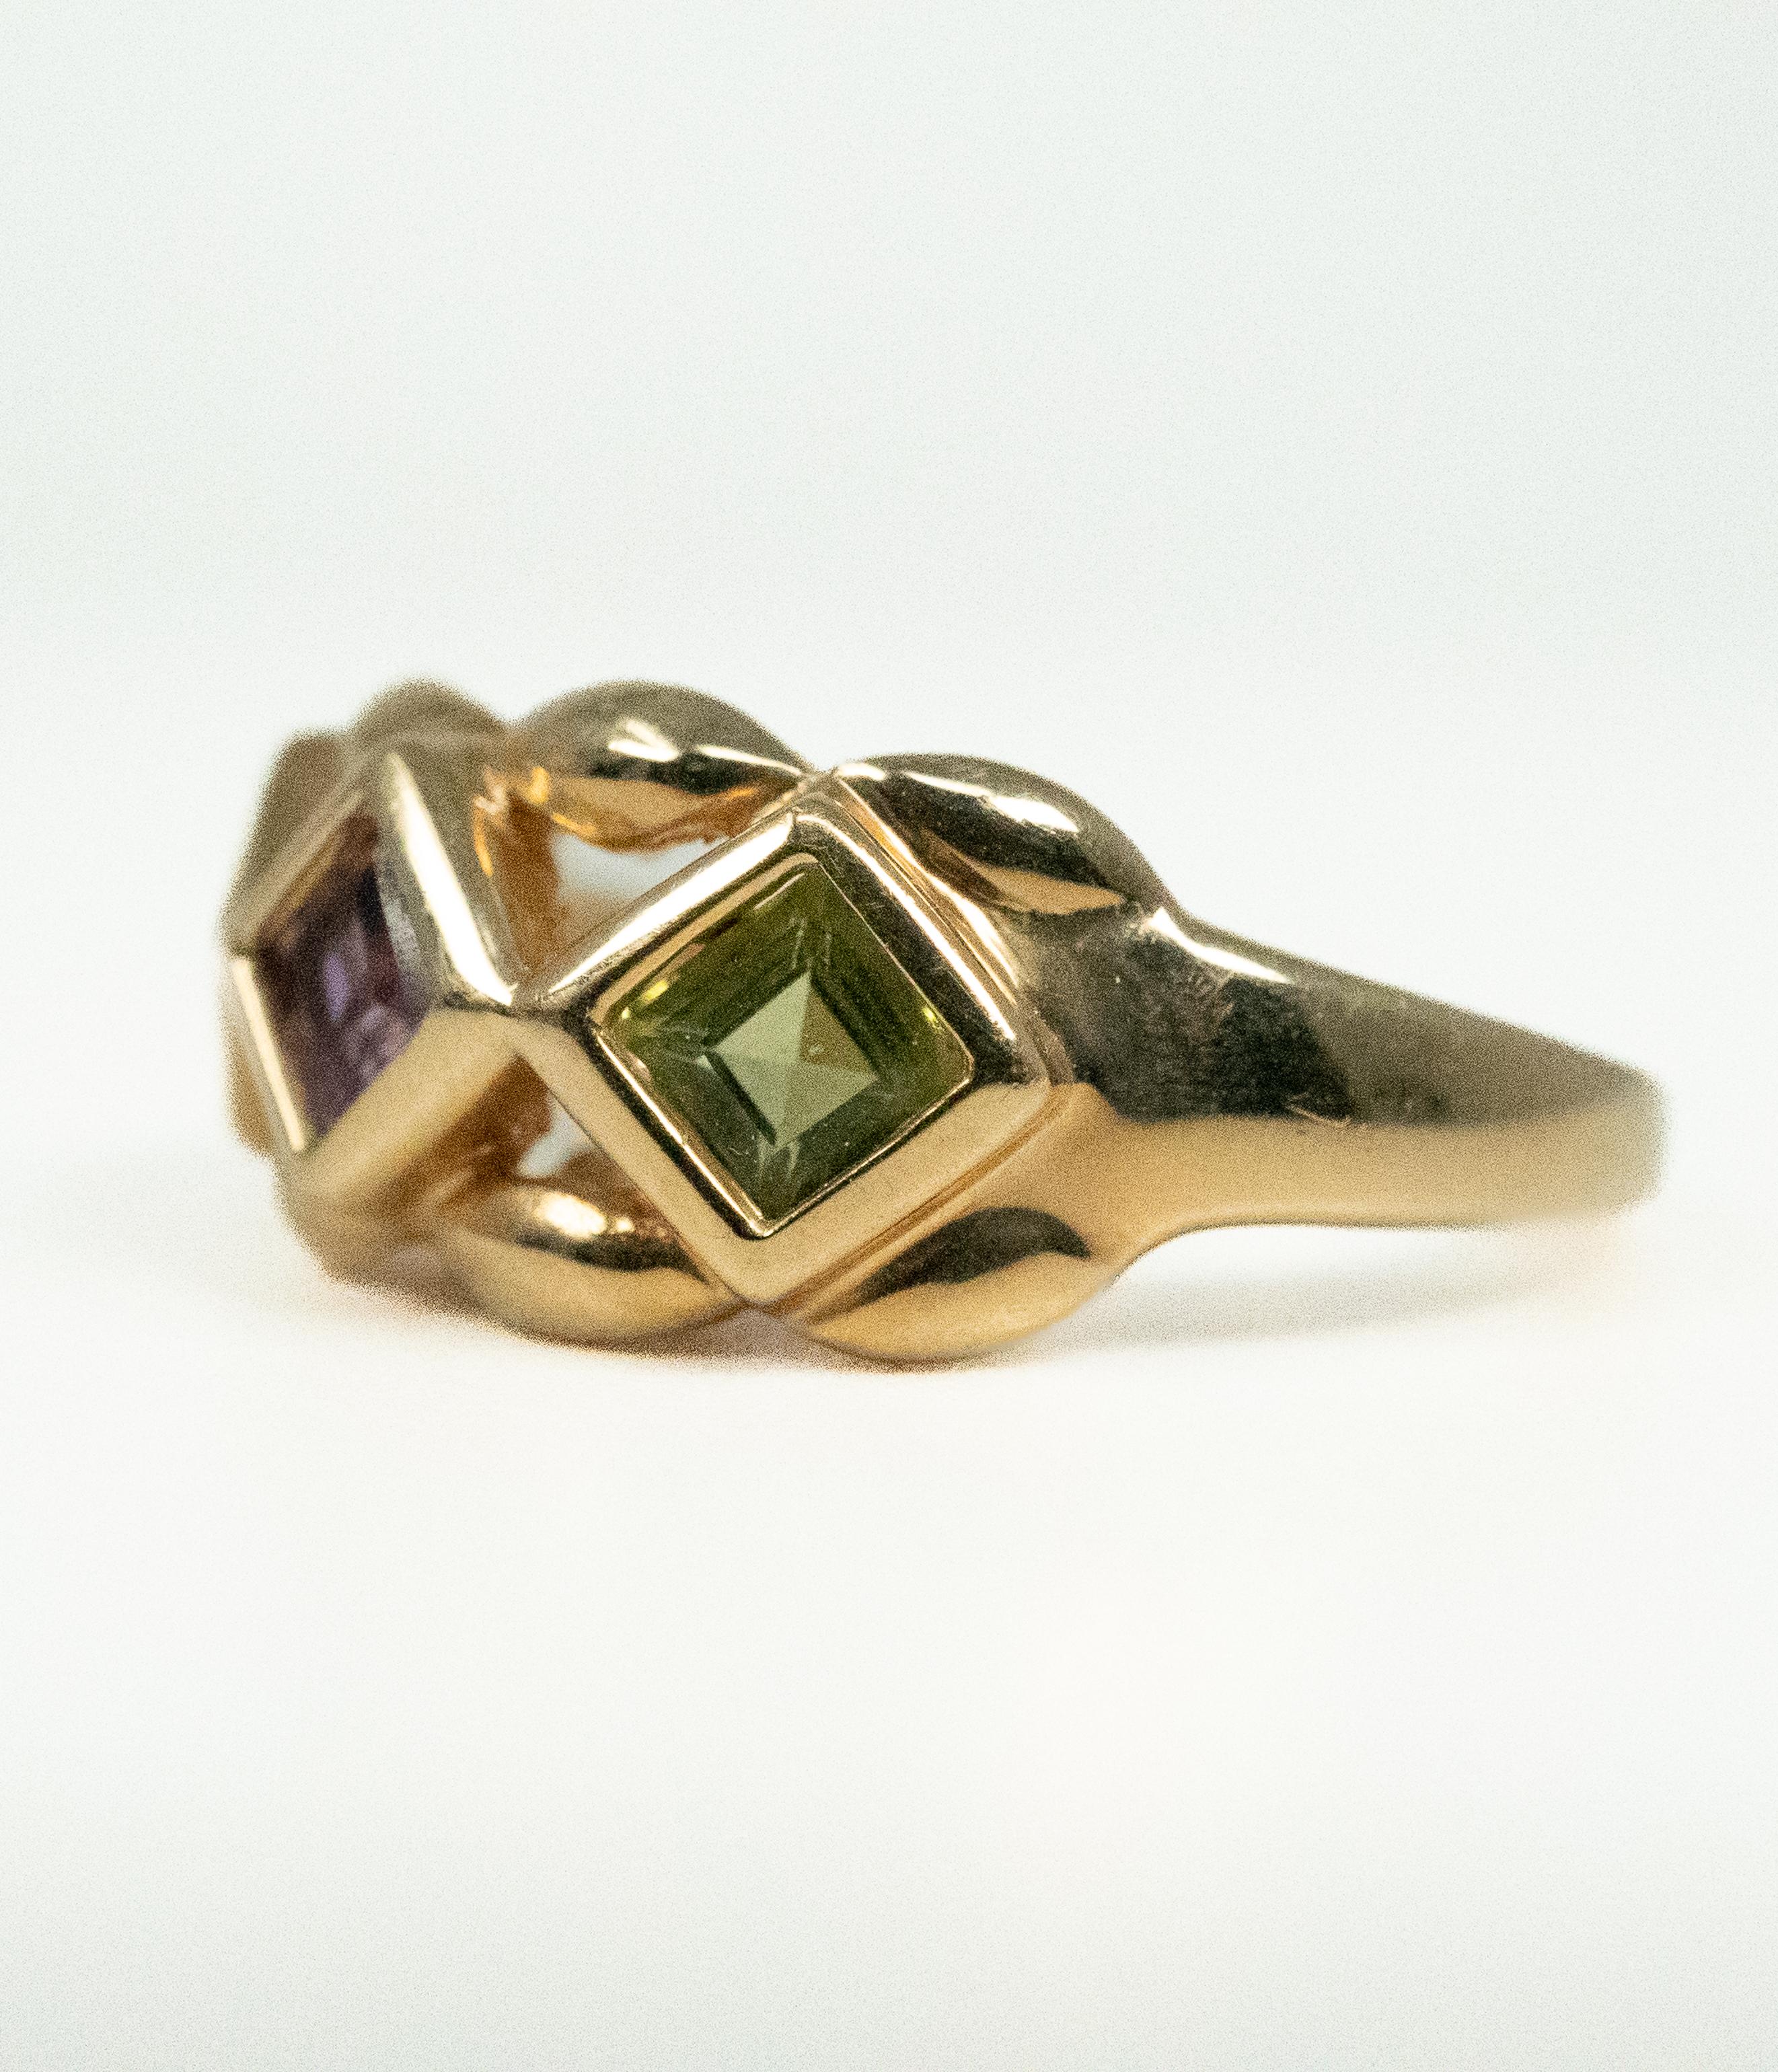 Such beautiful soft colors!  The Citrine, Amethyst and Topaz stones just pop!